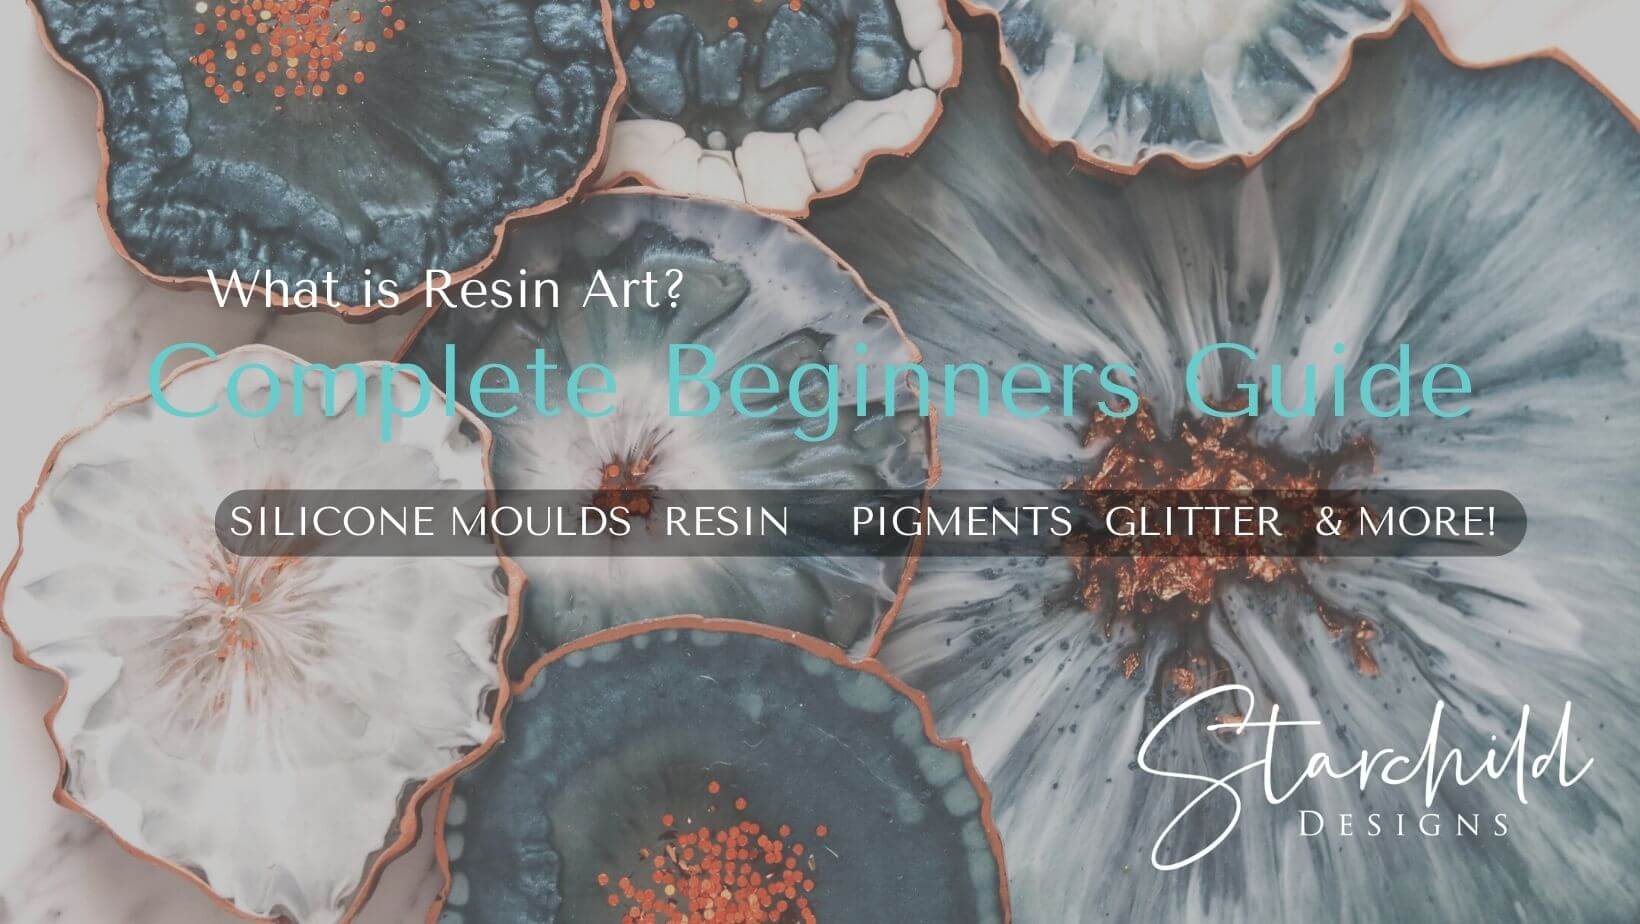 How to do Resin Art? The Complete Beginners Guide to Getting Started.